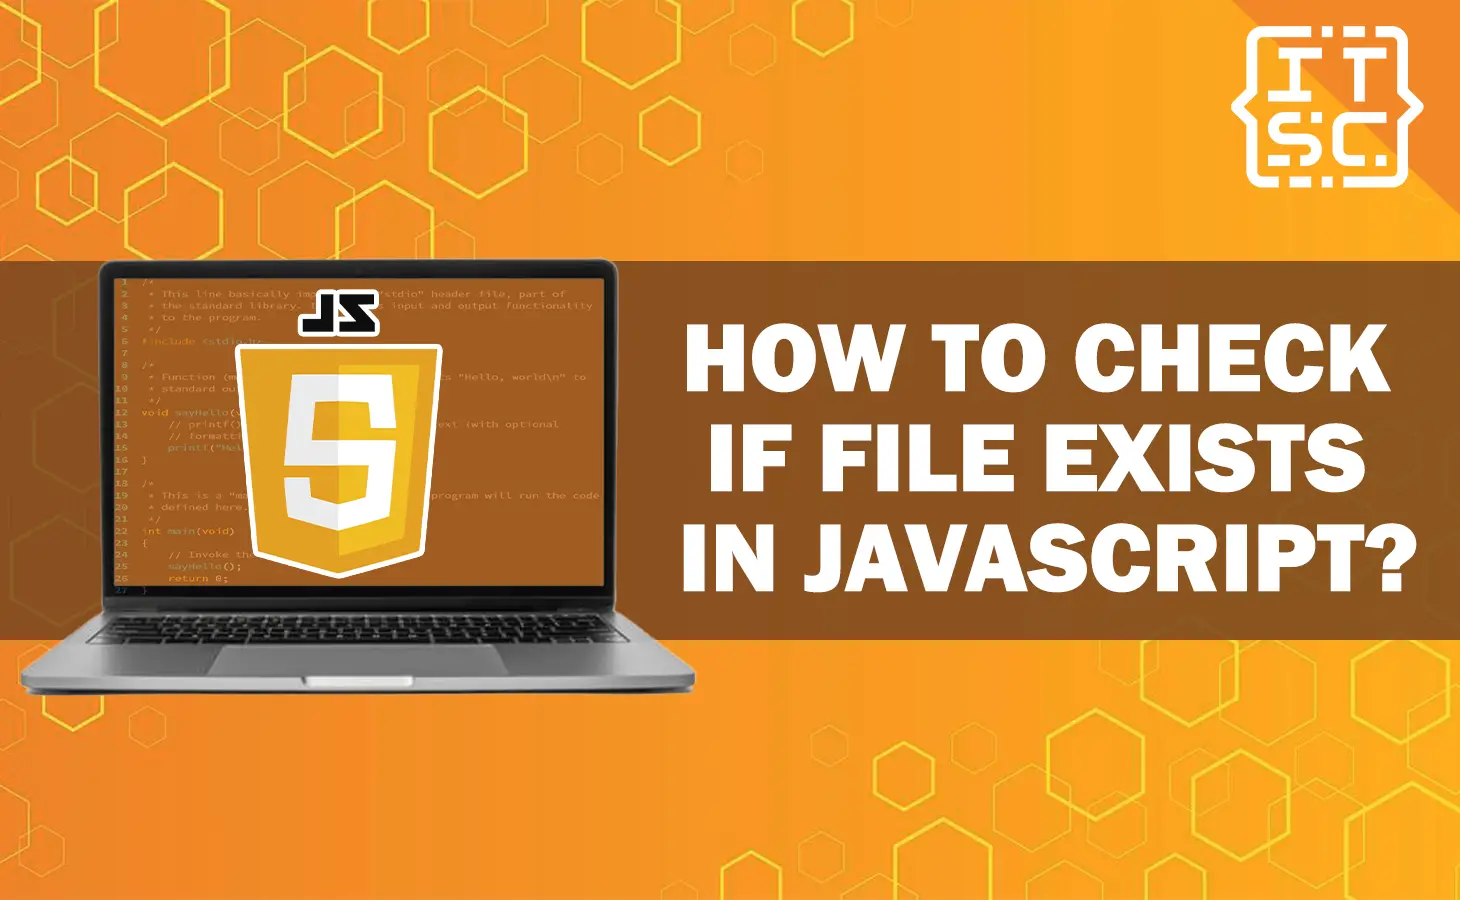 How to check if a file exists in JavaScript?